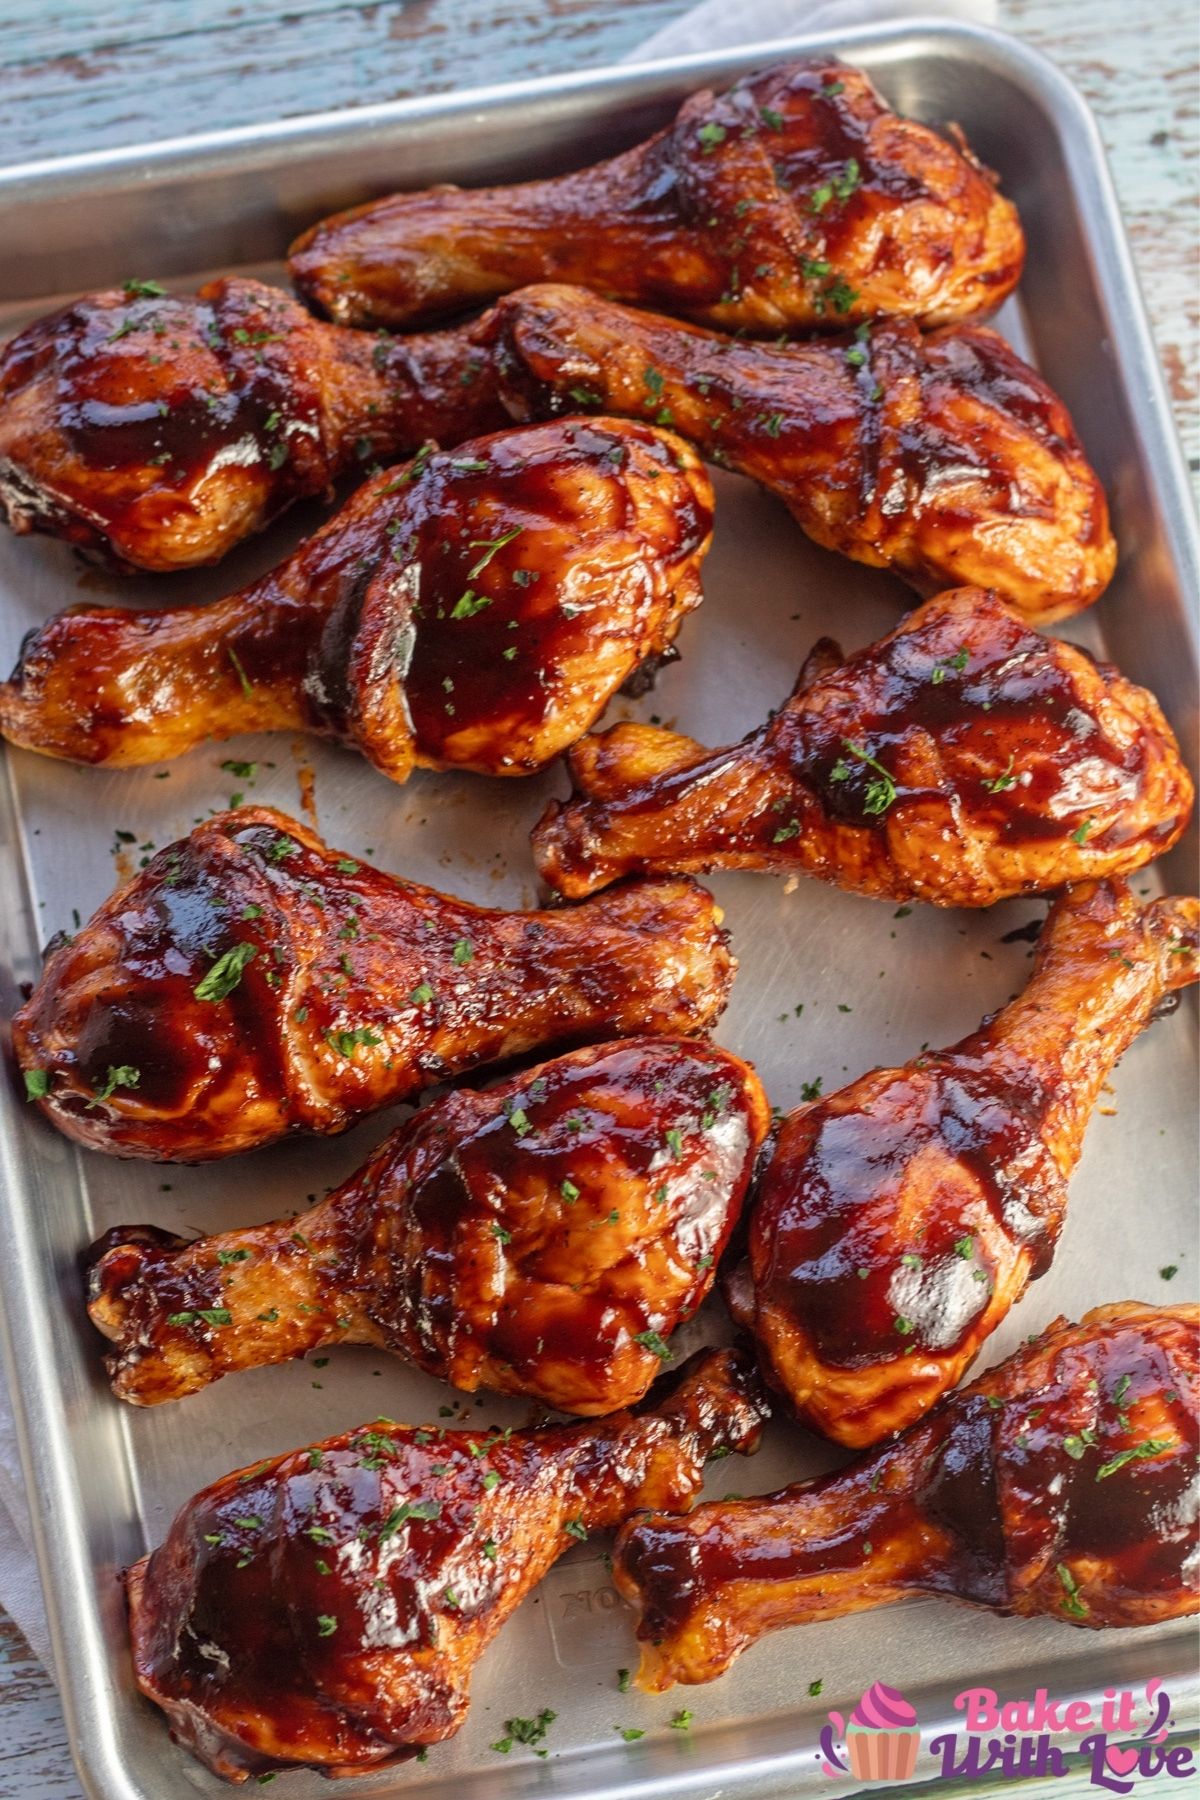 Overhead of the baked bbq chicken drumsticks on metal tray.